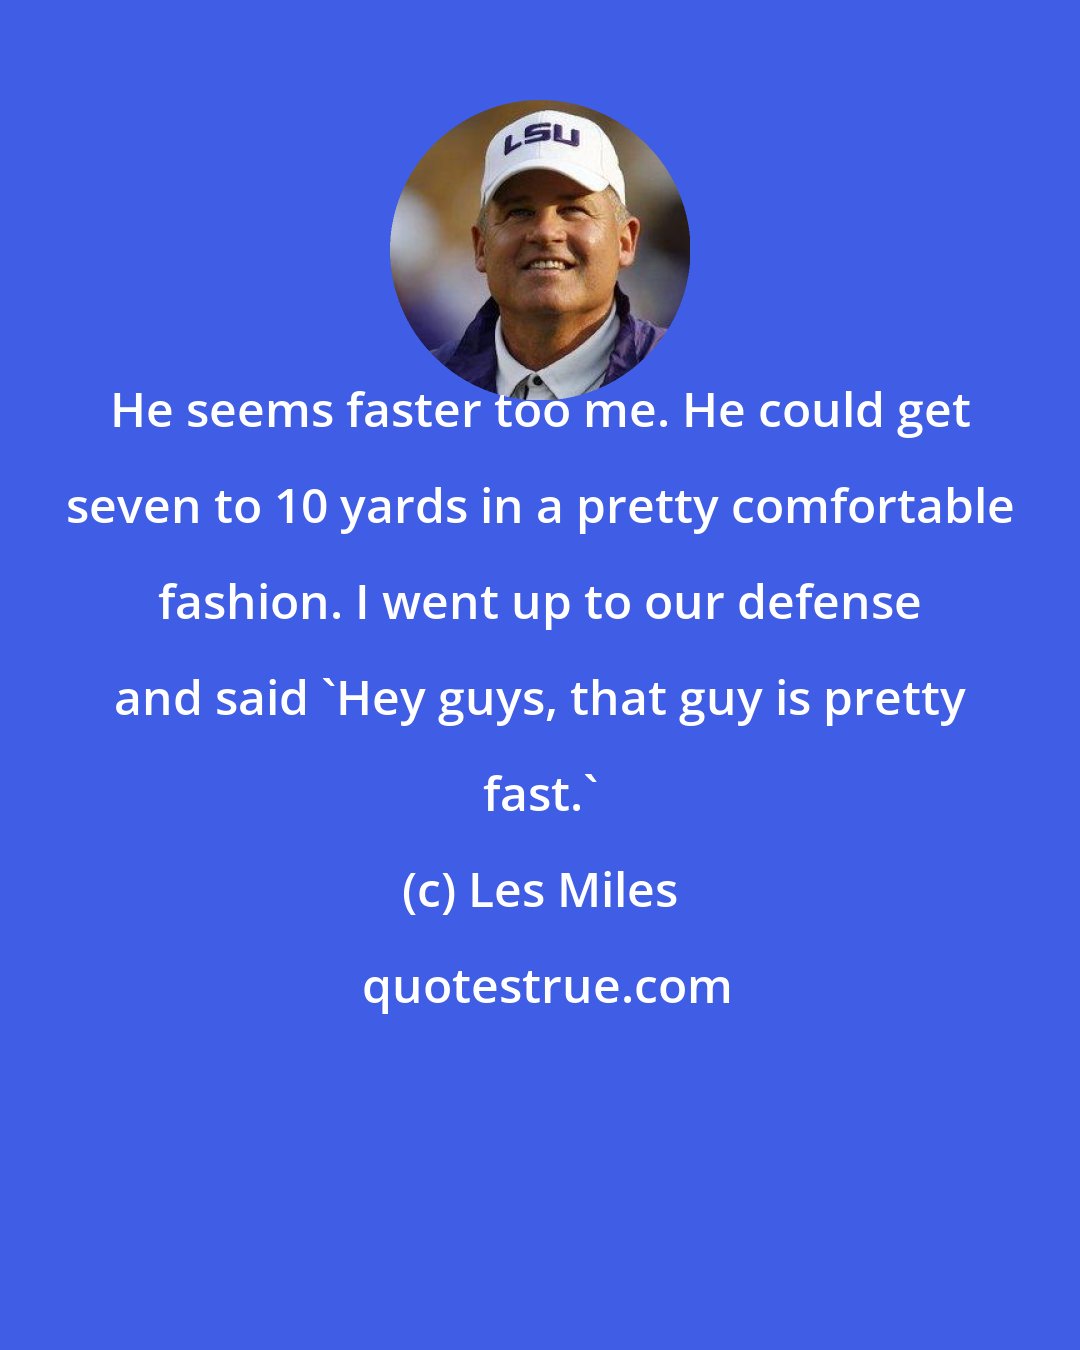 Les Miles: He seems faster too me. He could get seven to 10 yards in a pretty comfortable fashion. I went up to our defense and said `Hey guys, that guy is pretty fast.'